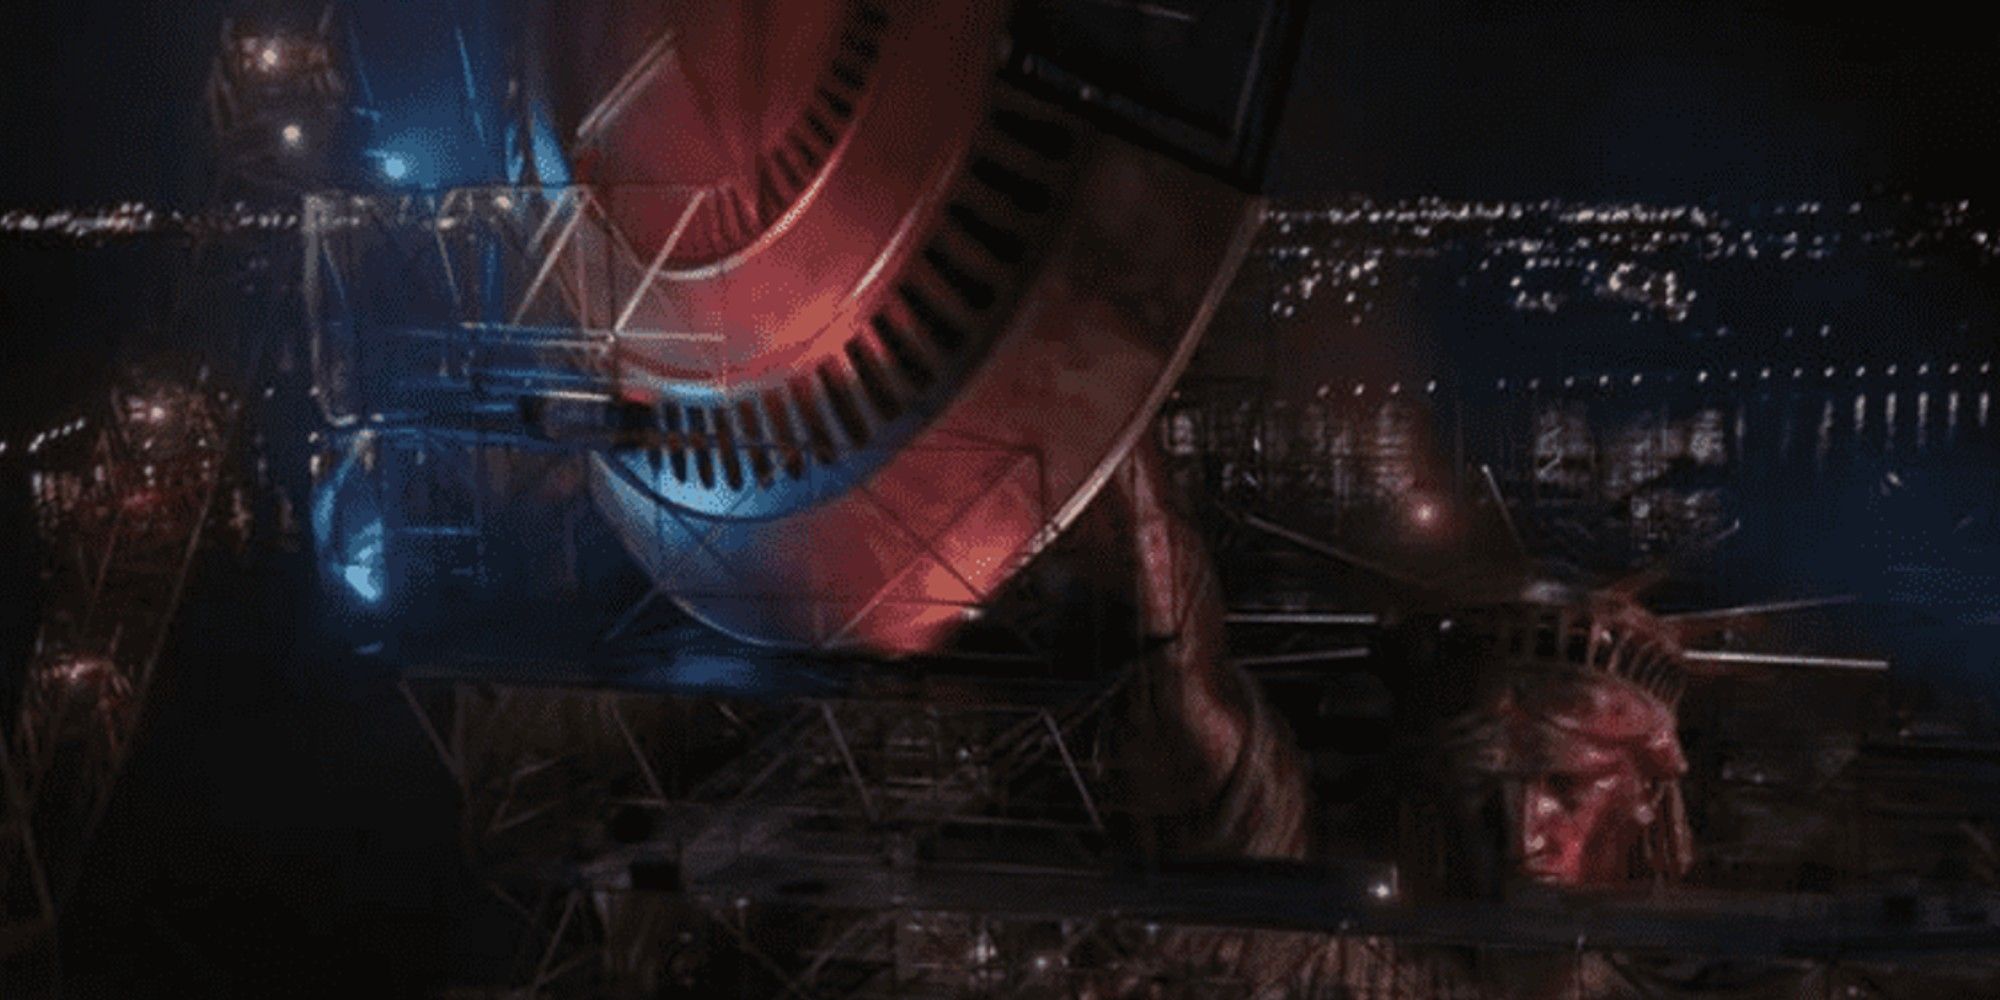 The Statue of Liberty with the Captain America shield in Spider-Man: No Way Home.